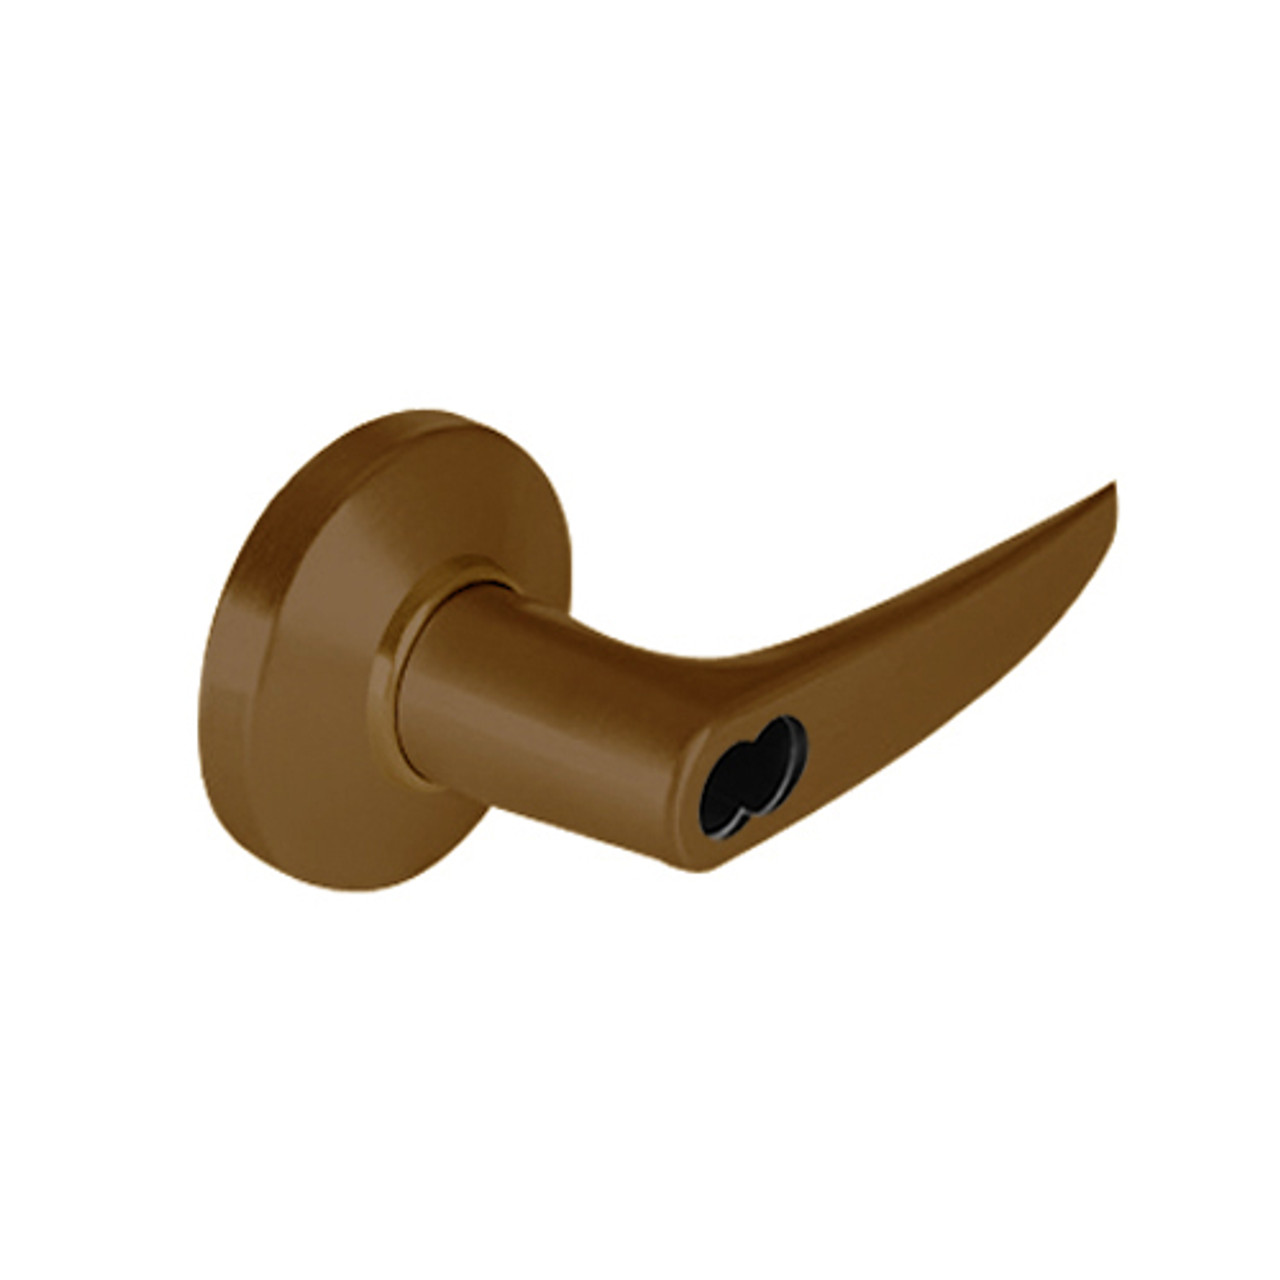 9K37RD16CS3690 Best 9K Series Special Function Cylindrical Lever Locks with Curved without Return Lever Design Accept 7 Pin Best Core in Dark Bronze